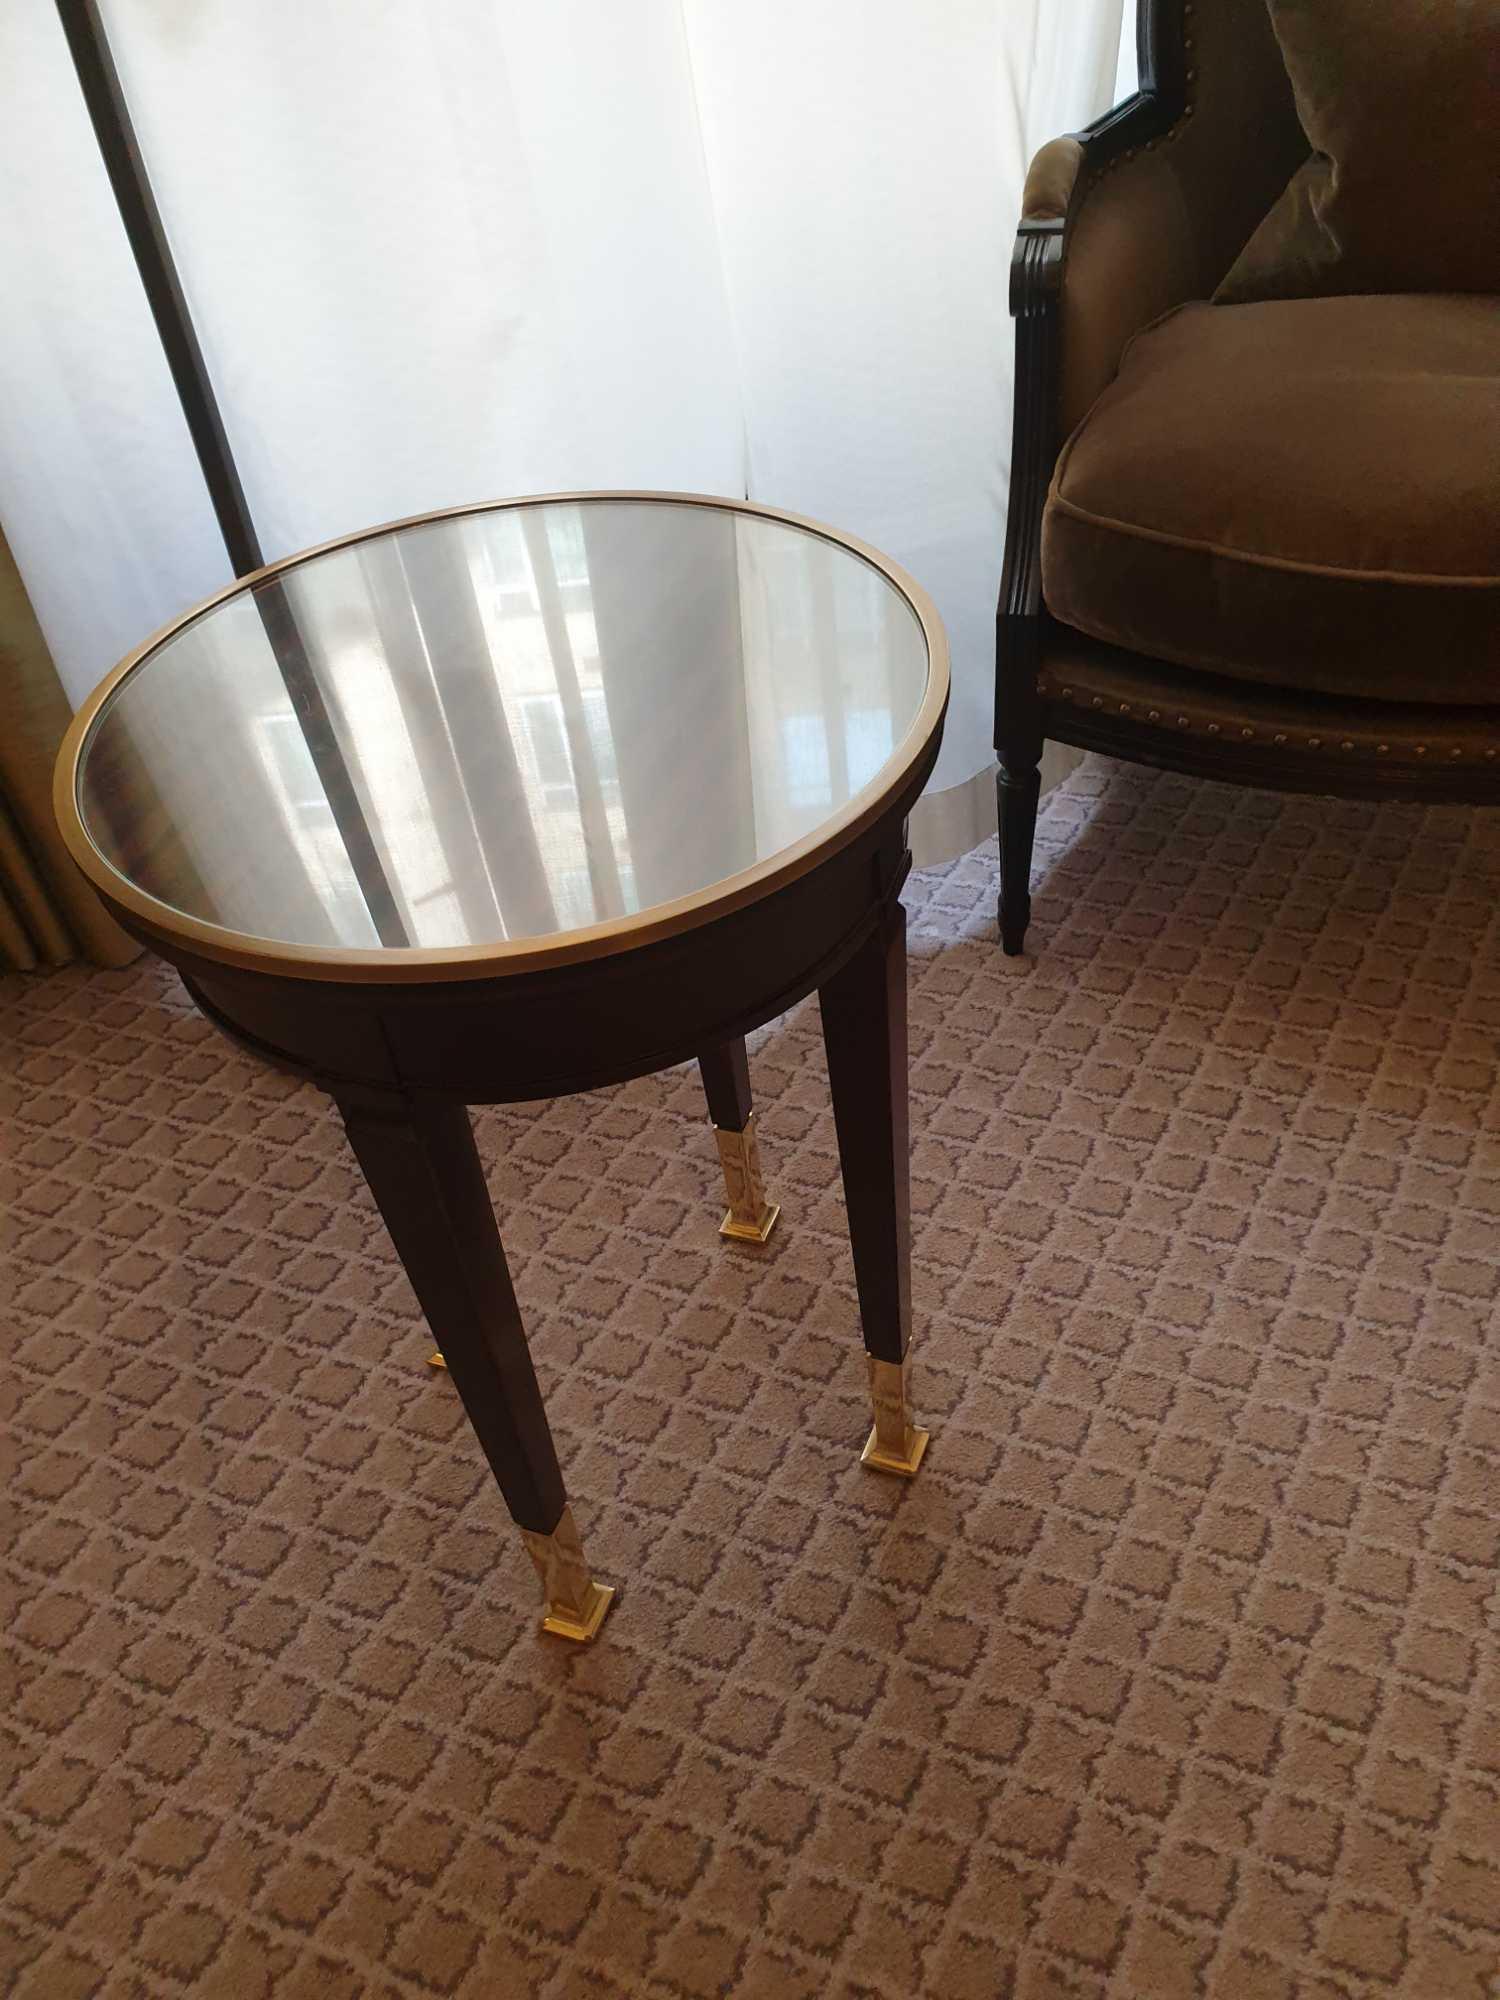 Circular Side Table With Antiqued Plate Top And Brass Trim Mounted On Tapering Legs With Brass - Image 2 of 2